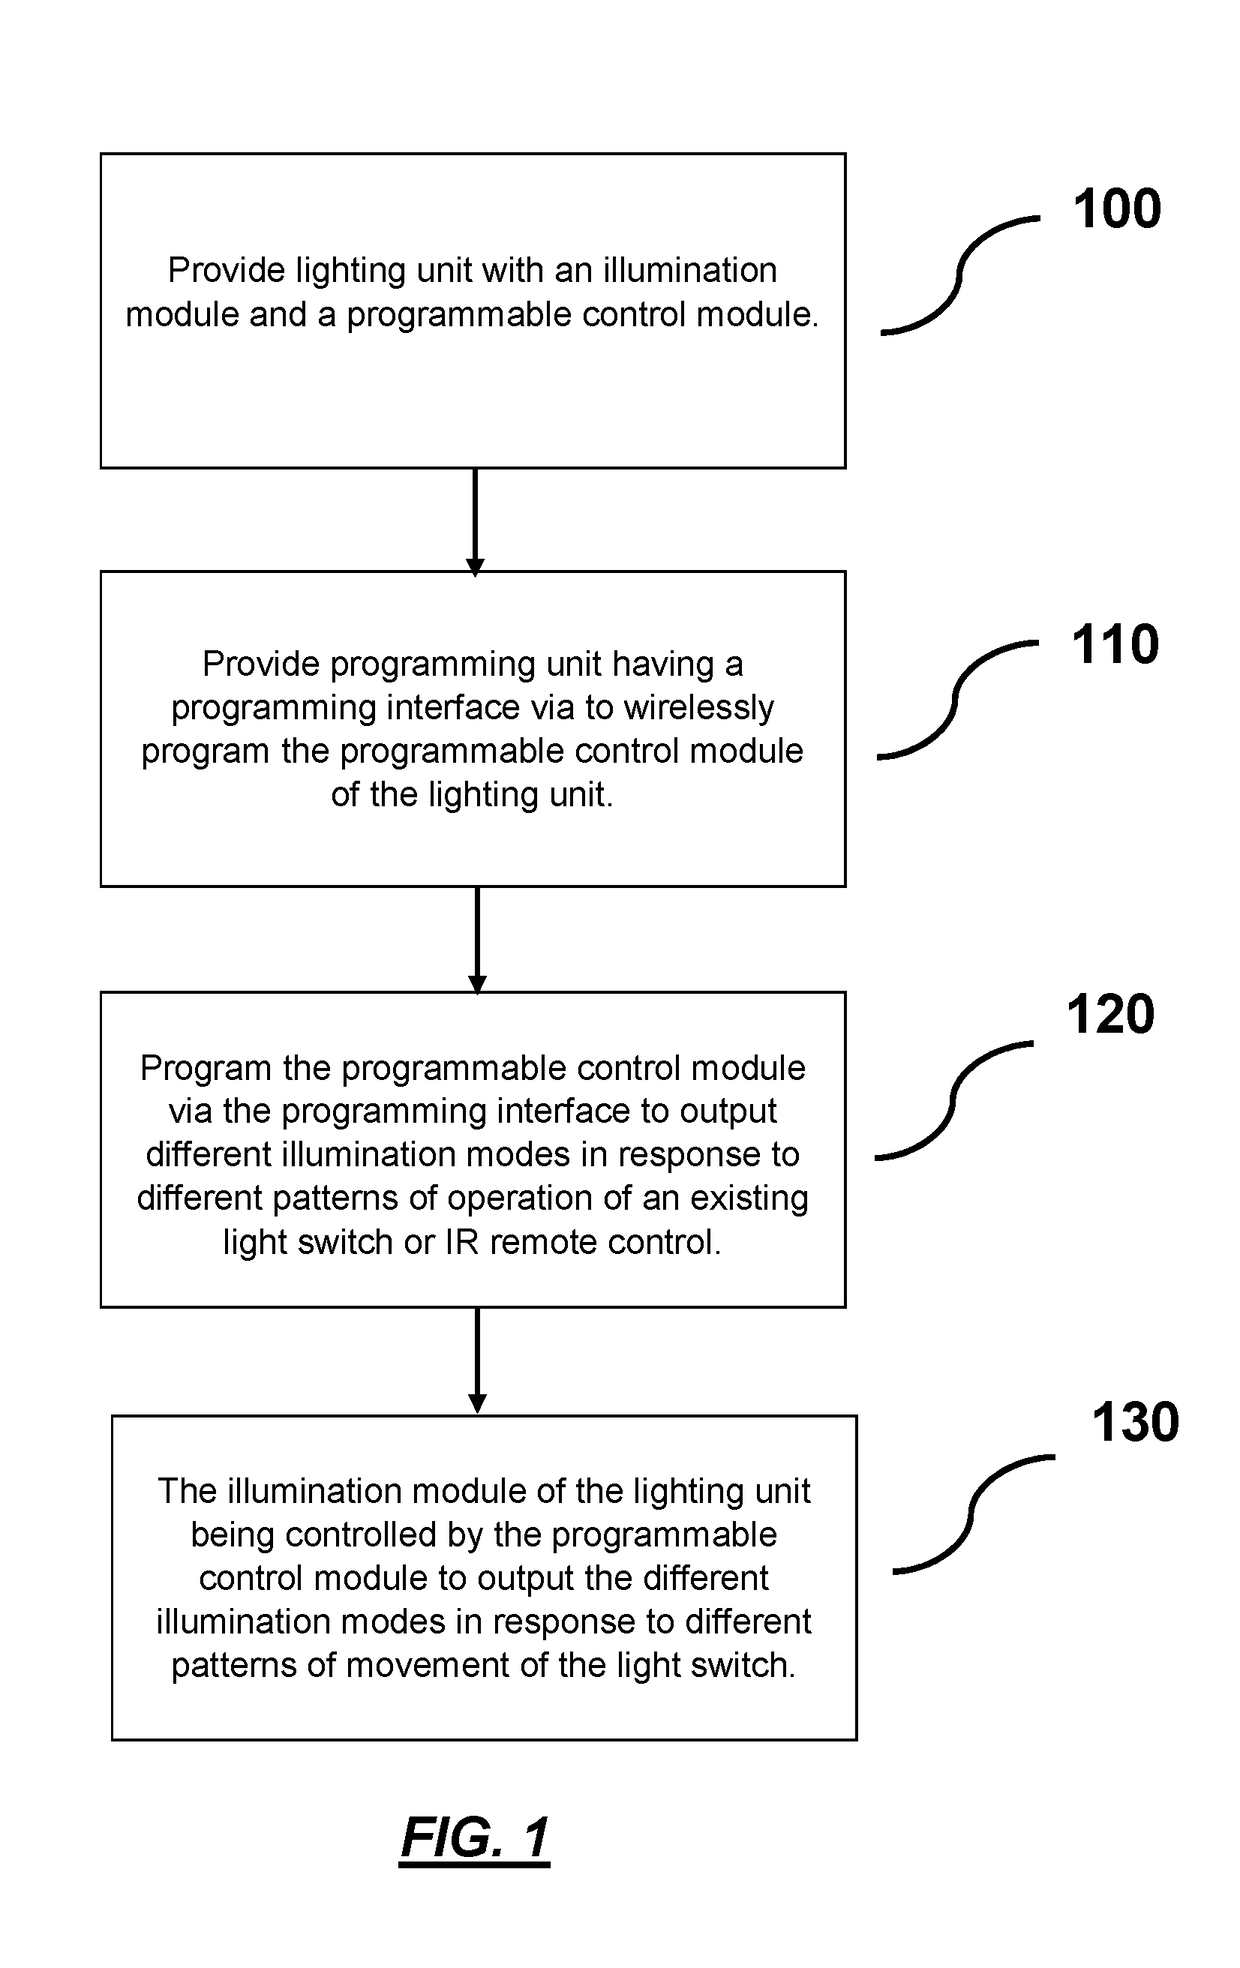 A configurable lighting system and method